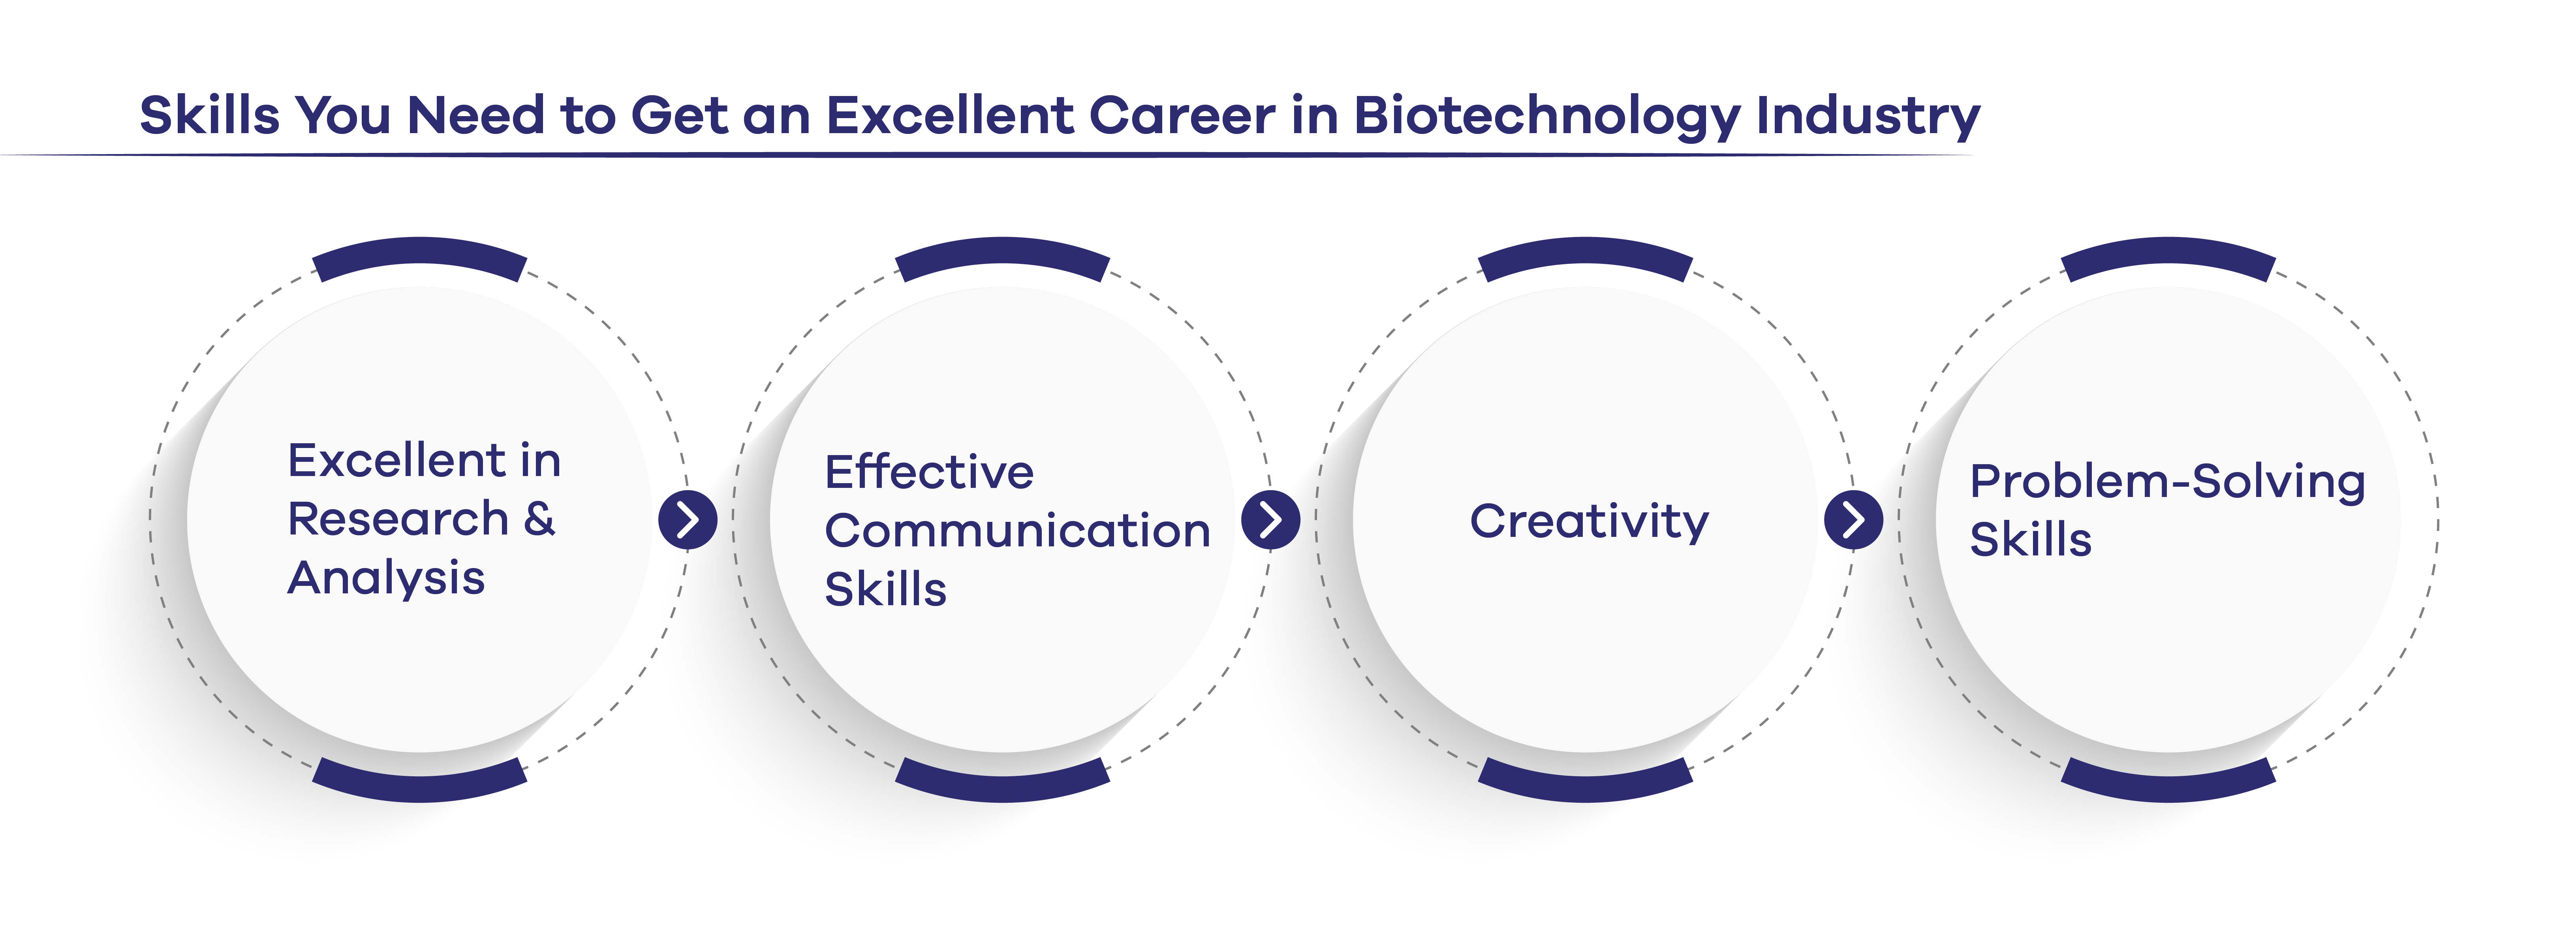 Skills You Need to Get an Excellent Career in Biotechnology Industry 